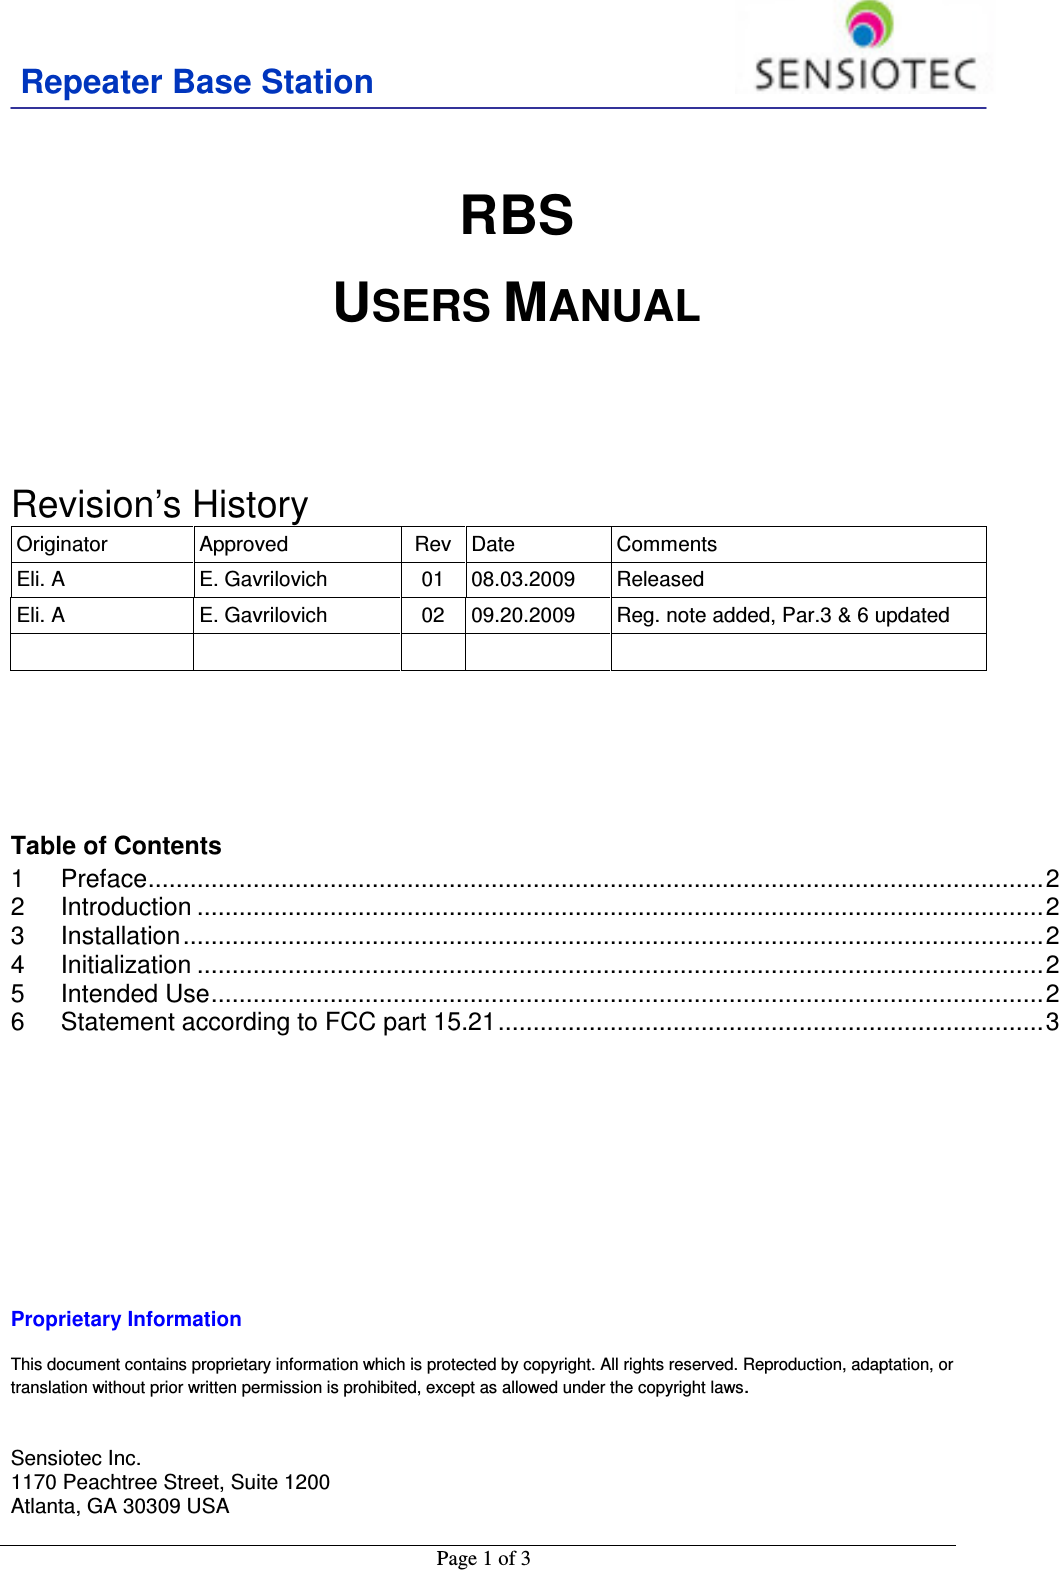 Repeater Base Station                                           Page 1 of 3     RBS USERS MANUAL      Revision’s History  Originator  Approved  Rev  Date  Comments Eli. A  E. Gavrilovich  01  08.03.2009  Released Eli. A  E. Gavrilovich  02  09.20.2009  Reg. note added, Par.3 &amp; 6 updated               Table of Contents 1 Preface ................................................................................................................................ 2 2 Introduction ......................................................................................................................... 2 3 Installation ........................................................................................................................... 2 4 Initialization ......................................................................................................................... 2 5 Intended Use ....................................................................................................................... 2 6 Statement according to FCC part 15.21 .............................................................................. 3         Proprietary Information  This document contains proprietary information which is protected by copyright. All rights reserved. Reproduction, adaptation, or translation without prior written permission is prohibited, except as allowed under the copyright laws.   Sensiotec Inc. 1170 Peachtree Street, Suite 1200 Atlanta, GA 30309 USA  